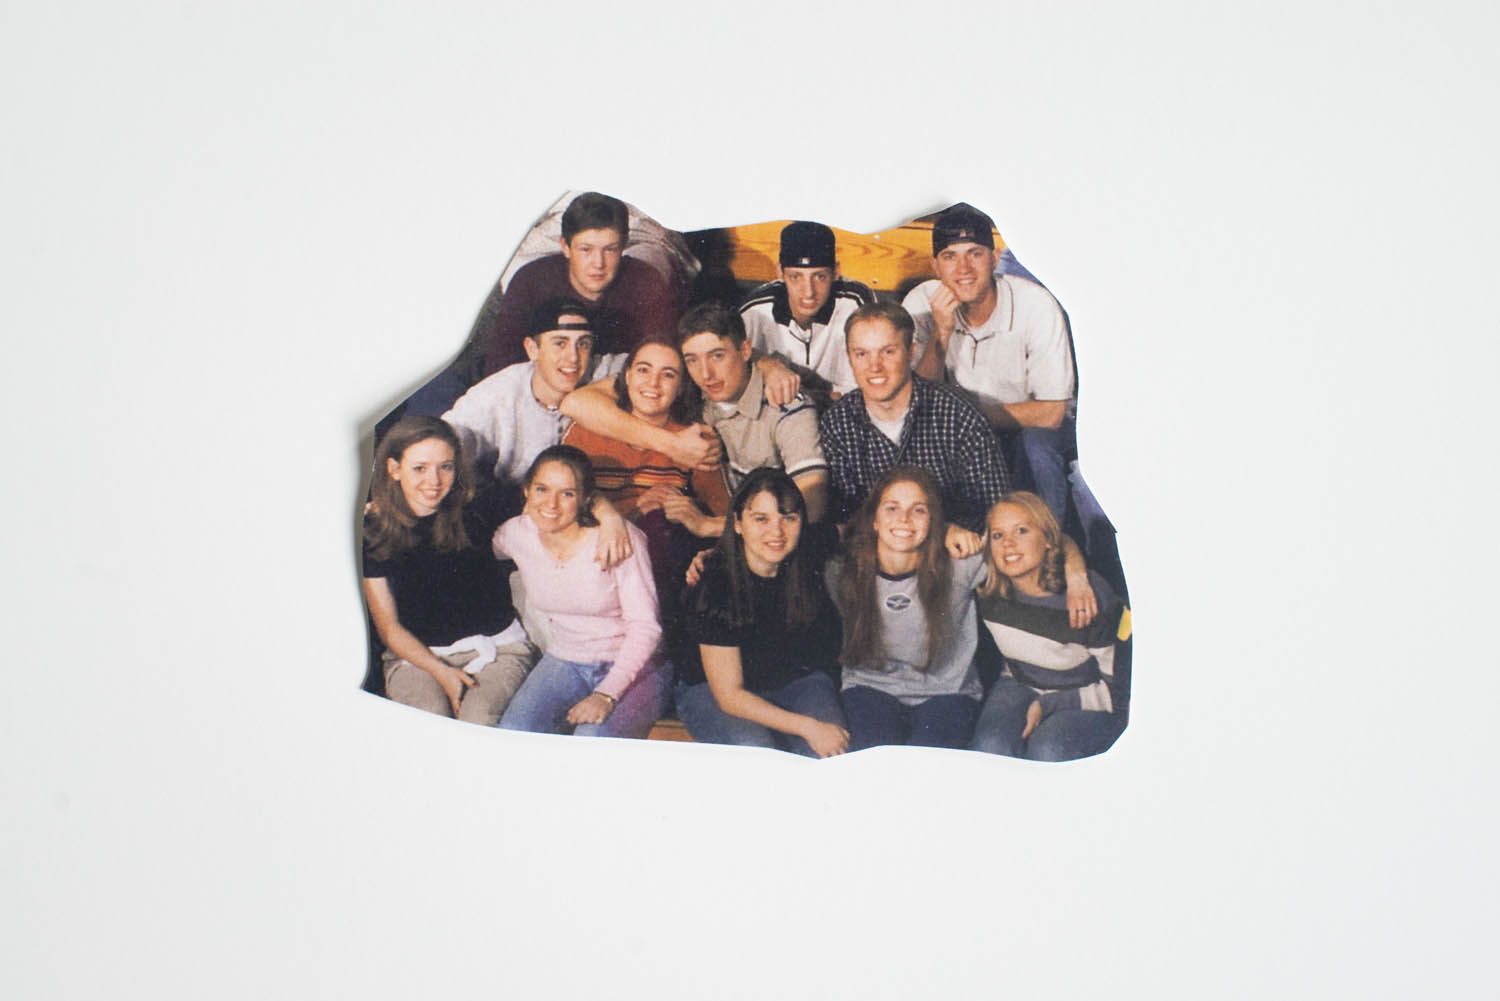 Detail from 1999 Columbine High School senior class photo. Image by Andres Gonzalez. 